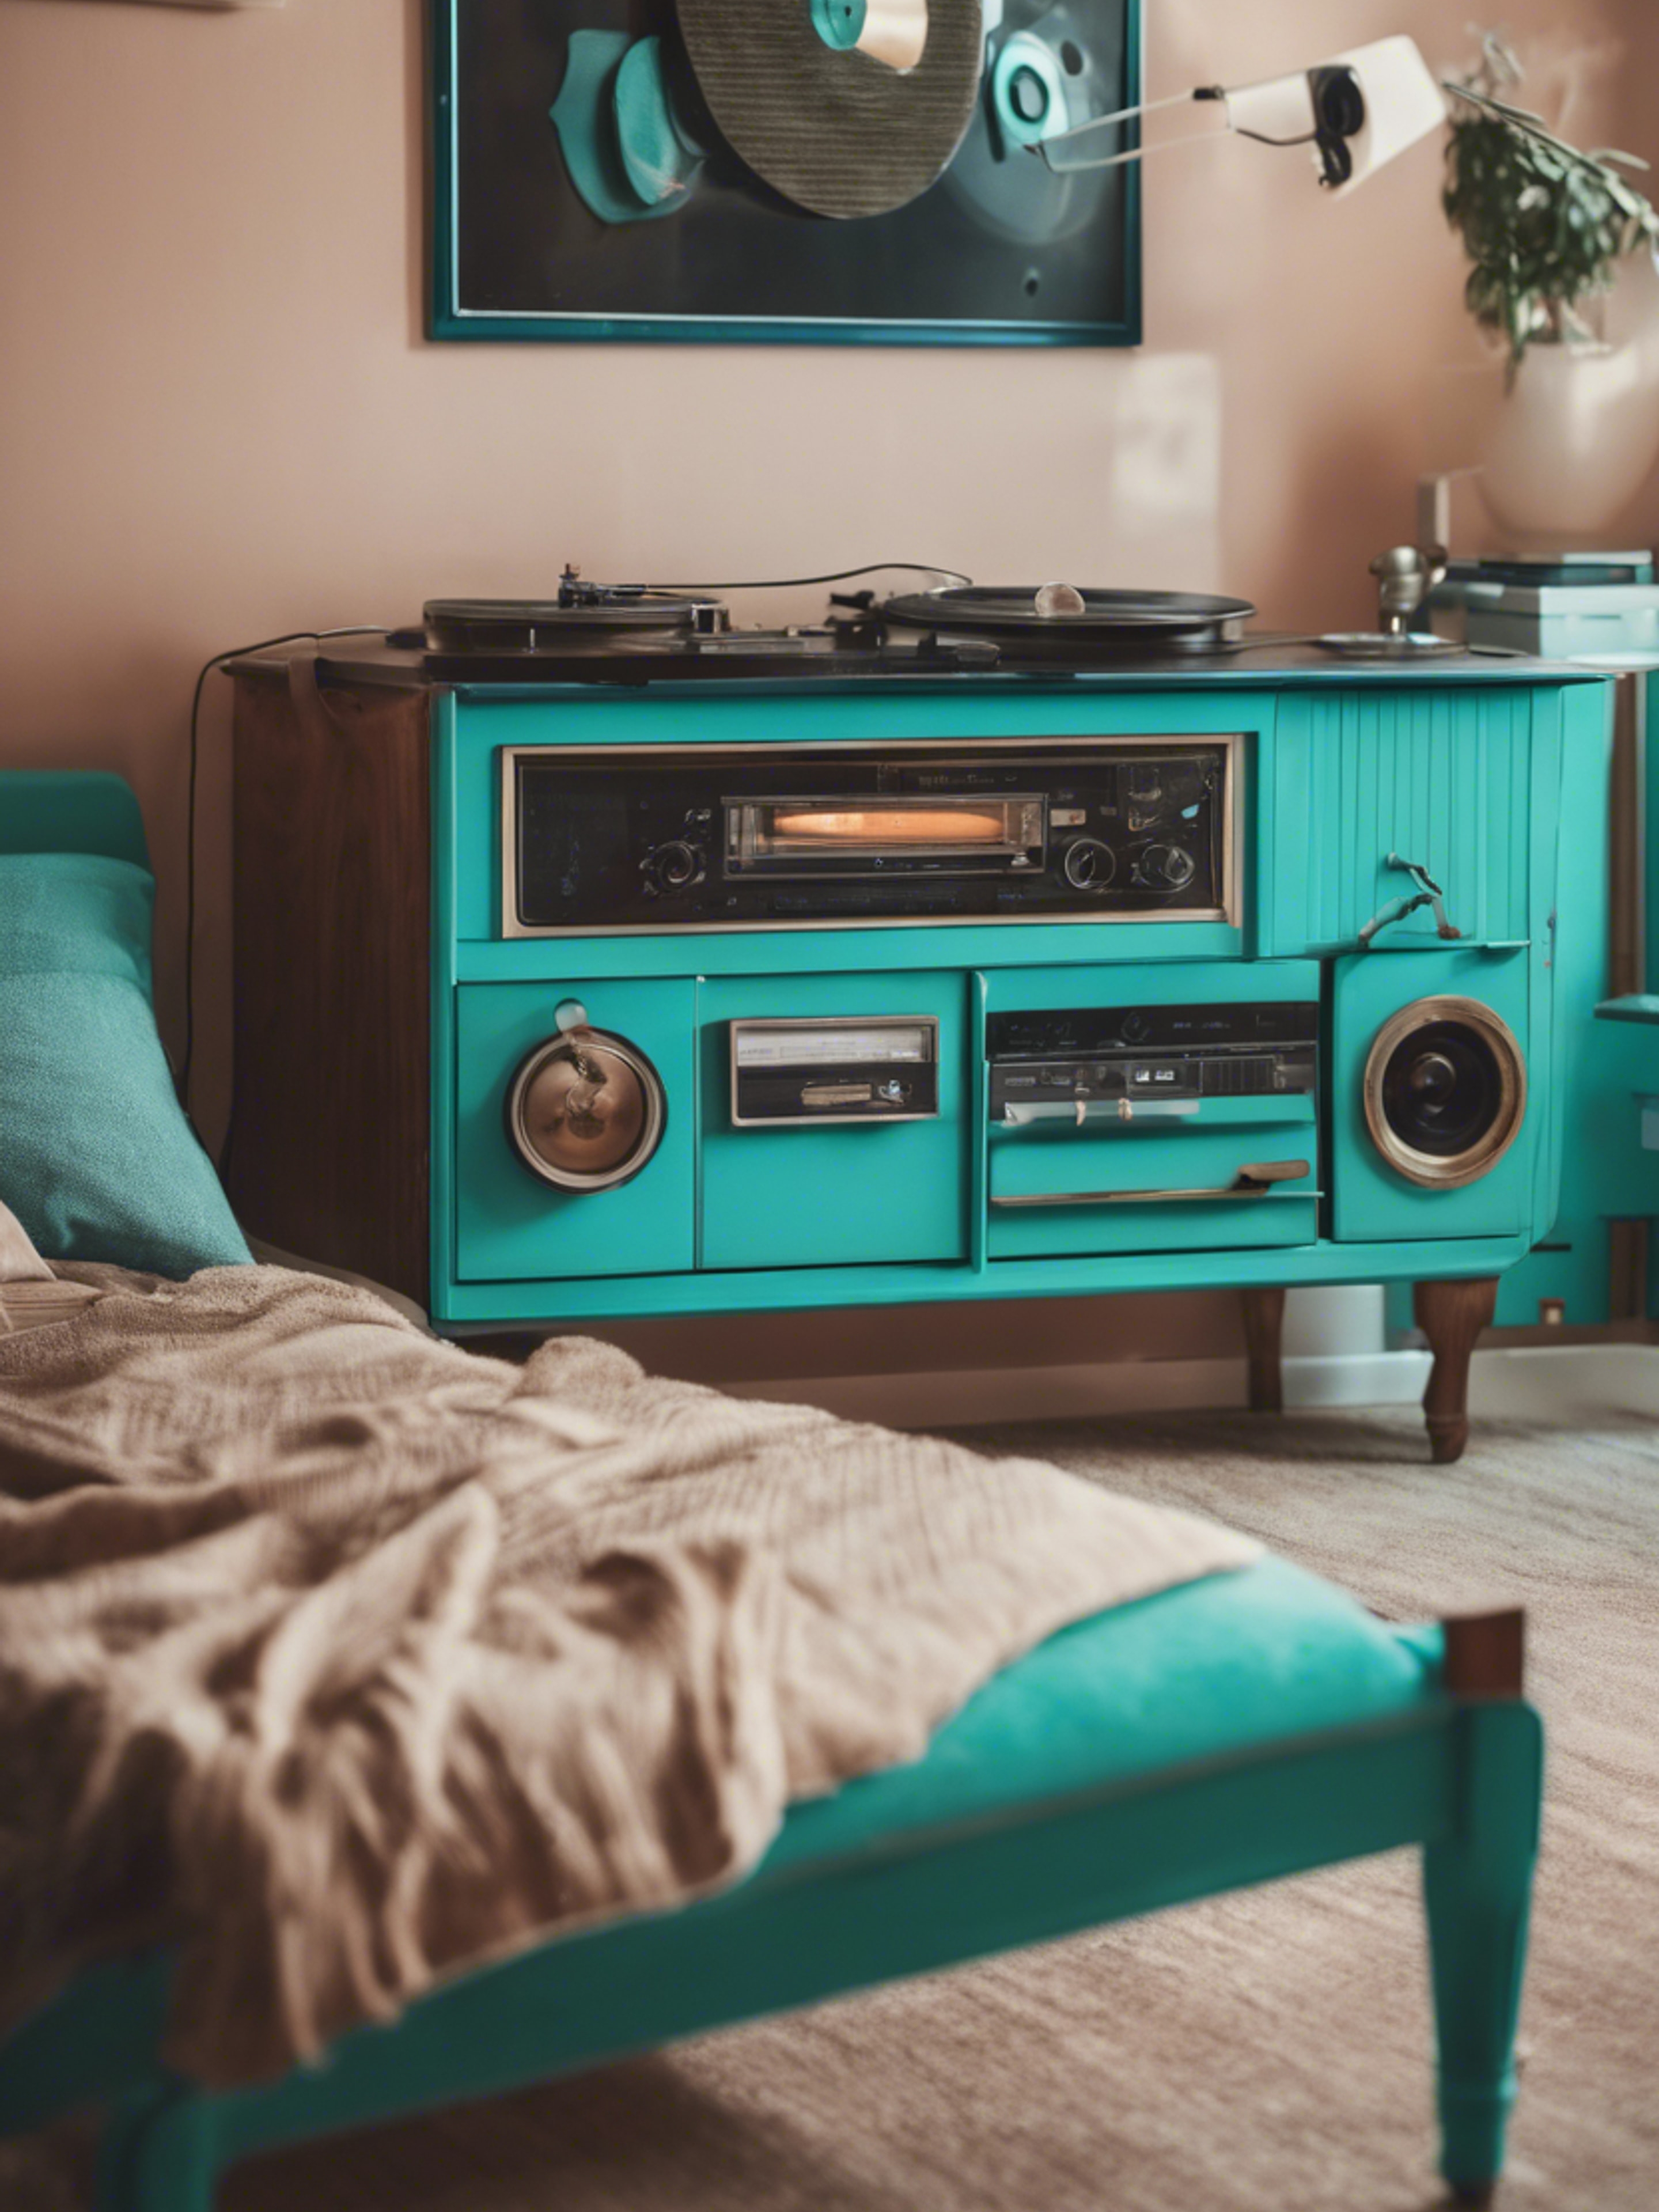 A turquoise retro bedroom with vintage furniture and record players Дэлгэцийн зураг[9d05420ae9754c17b49a]